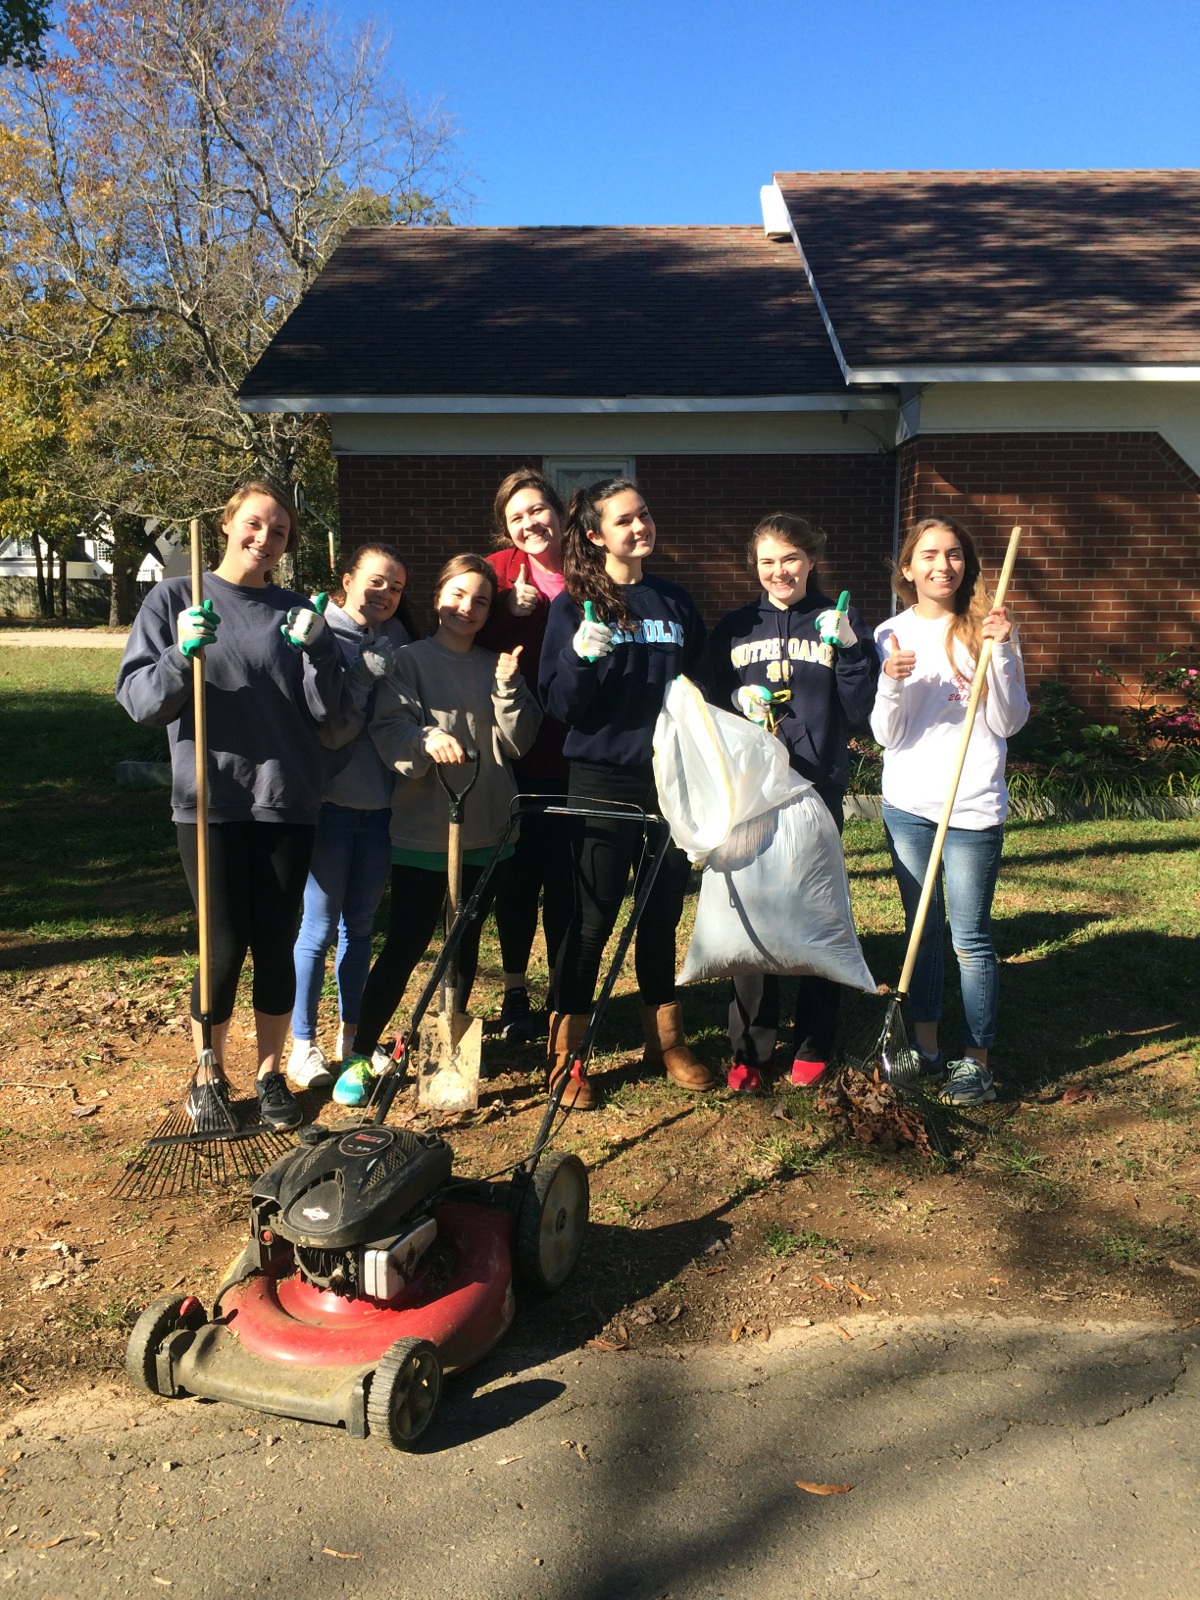 Members of SNHS posing with their yard work equipment outside the M.O.P. monastery.